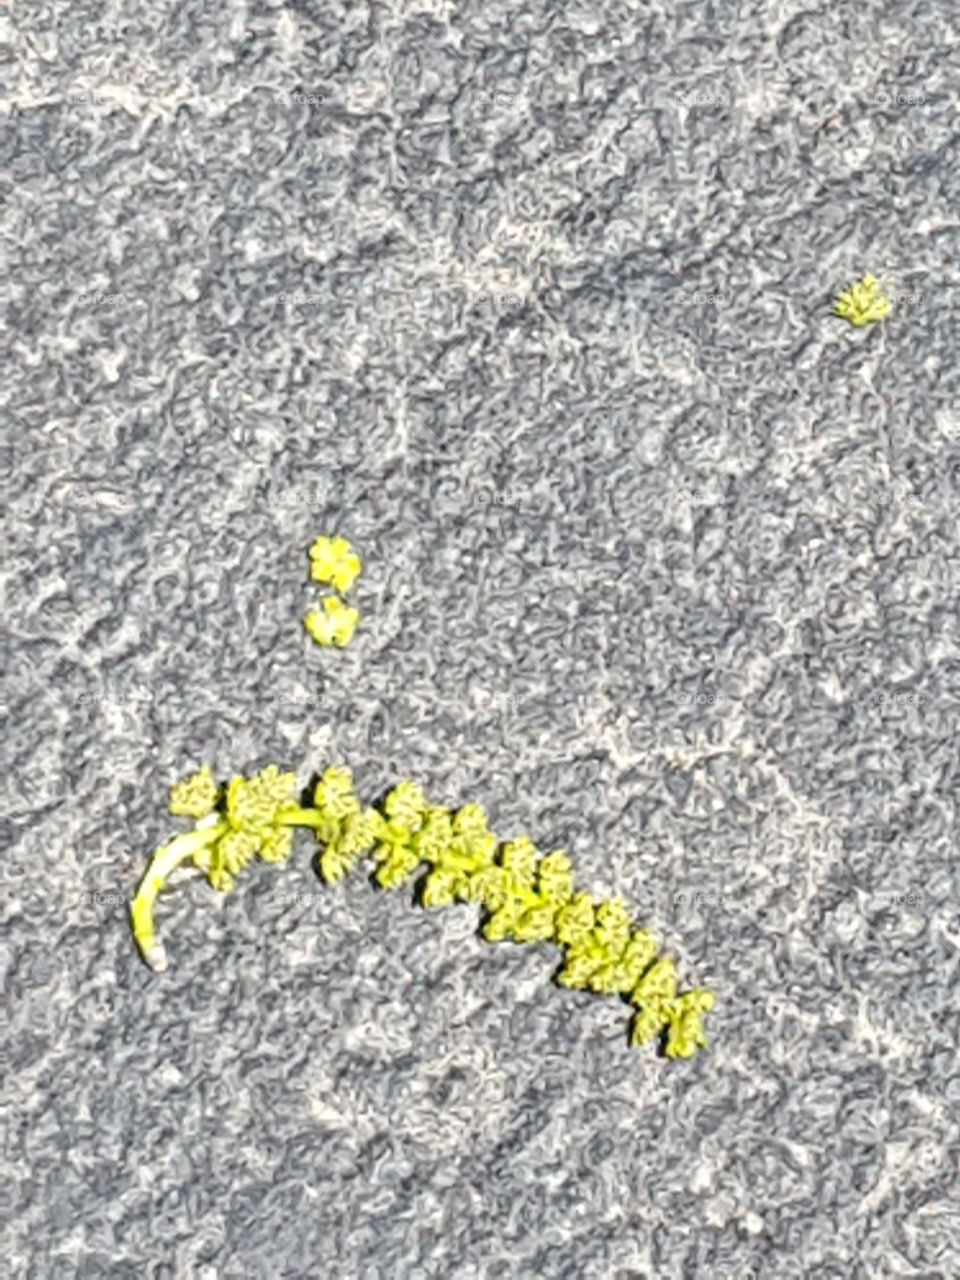 Fern Laying on Concrete